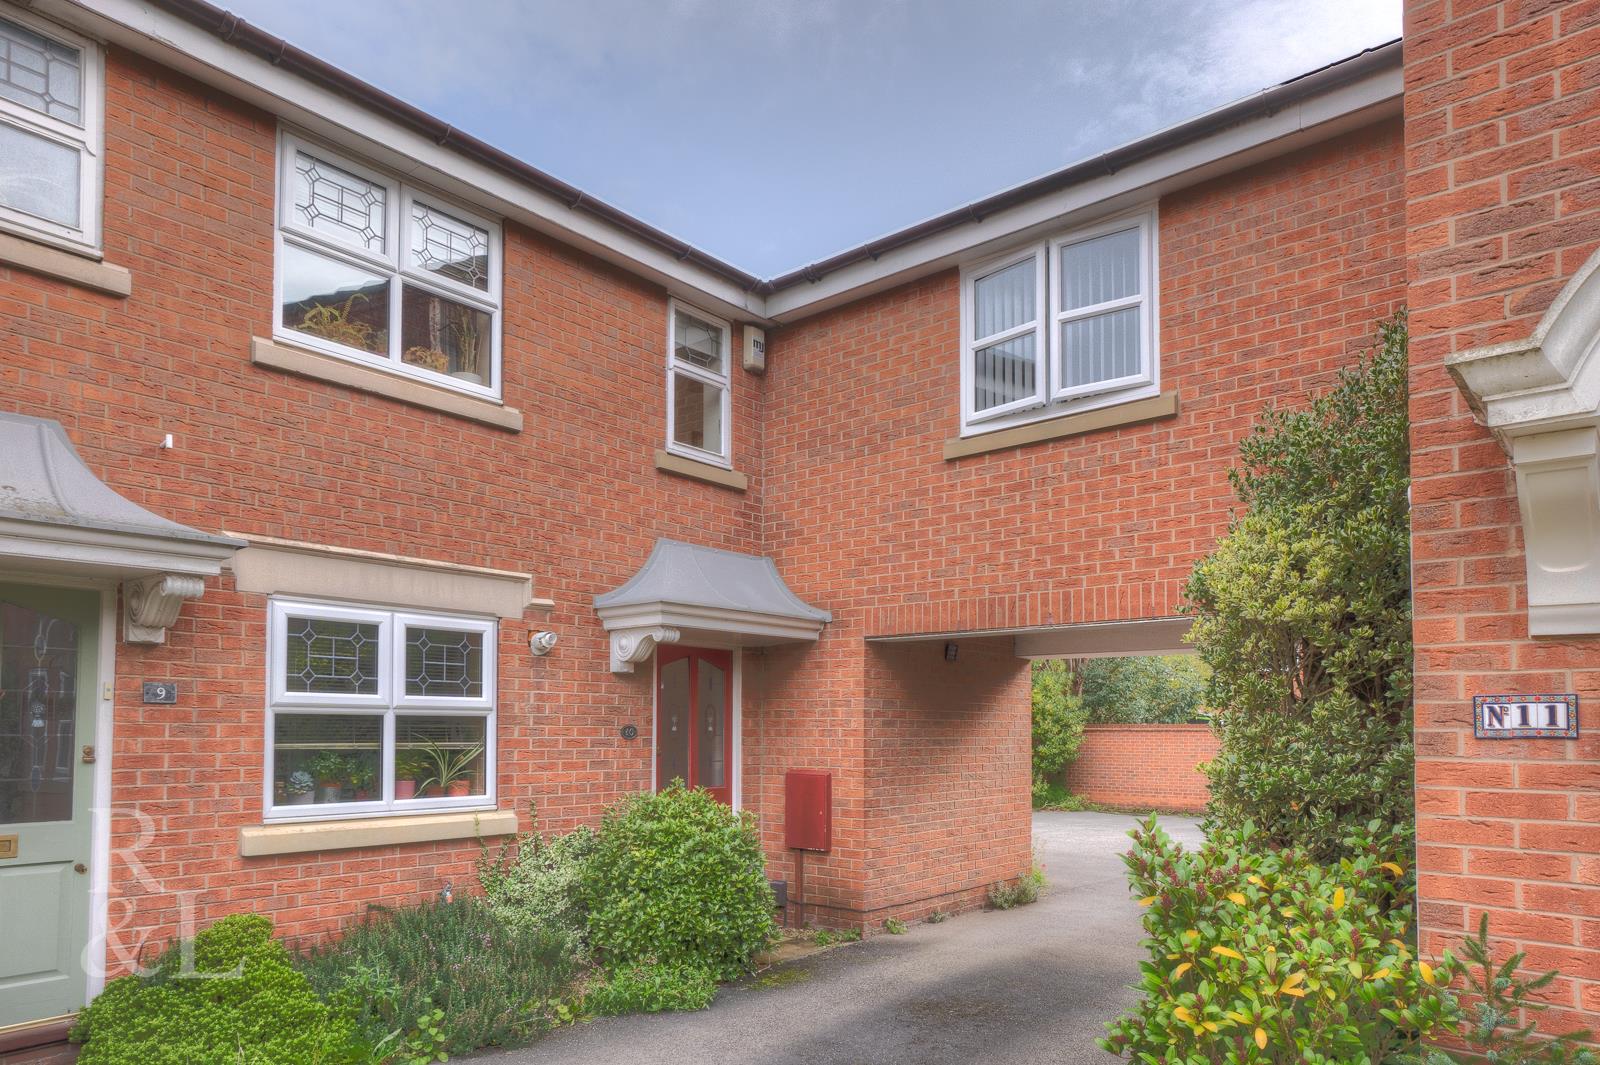 Property image for Oxendale Close, West Bridgford, Nottingham